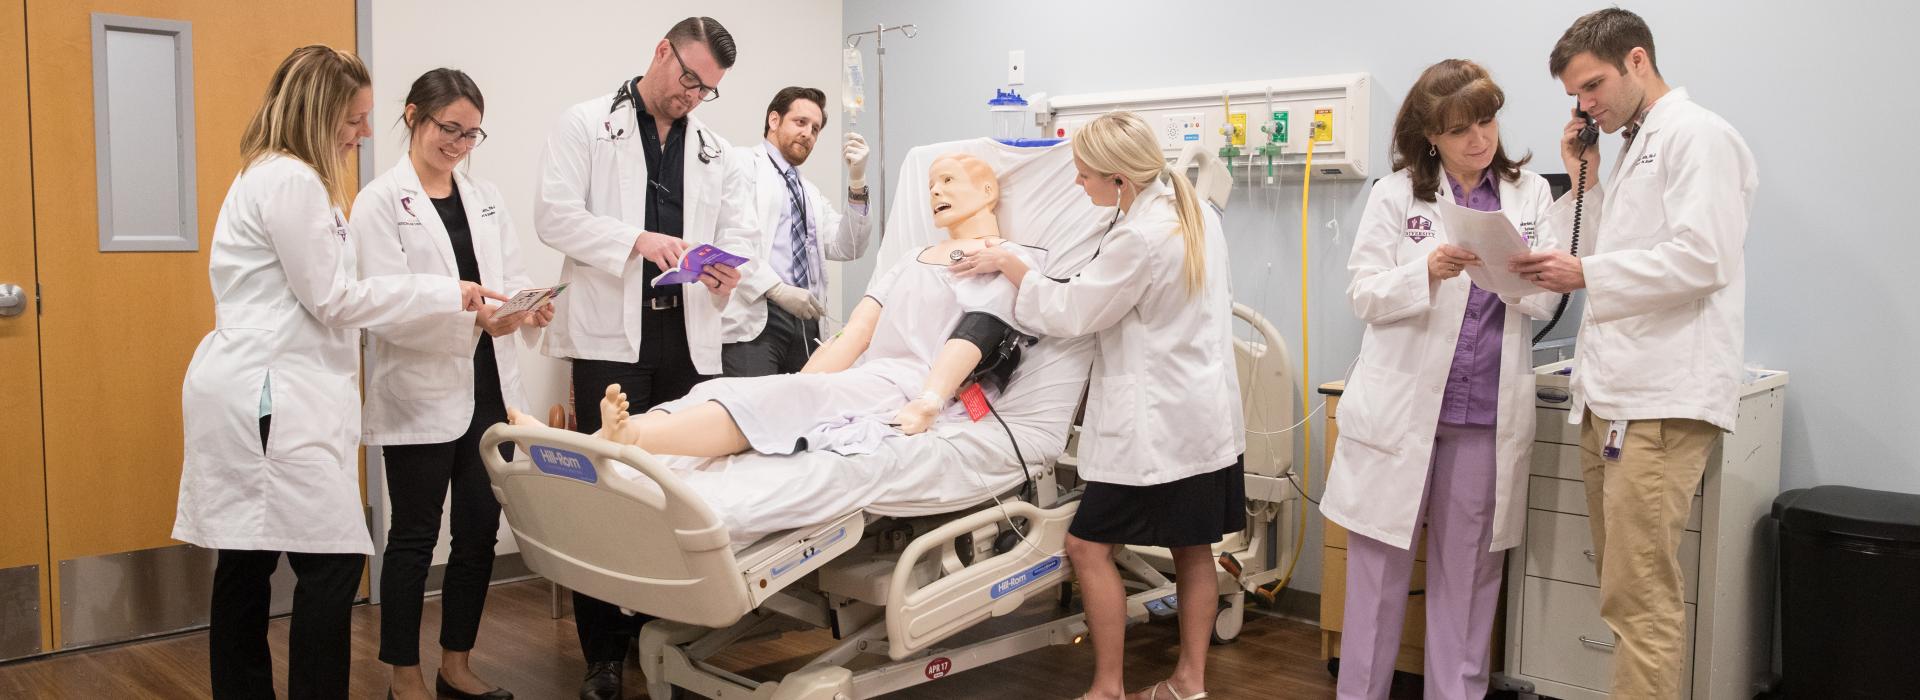 PA students work in the hospital simulation suite